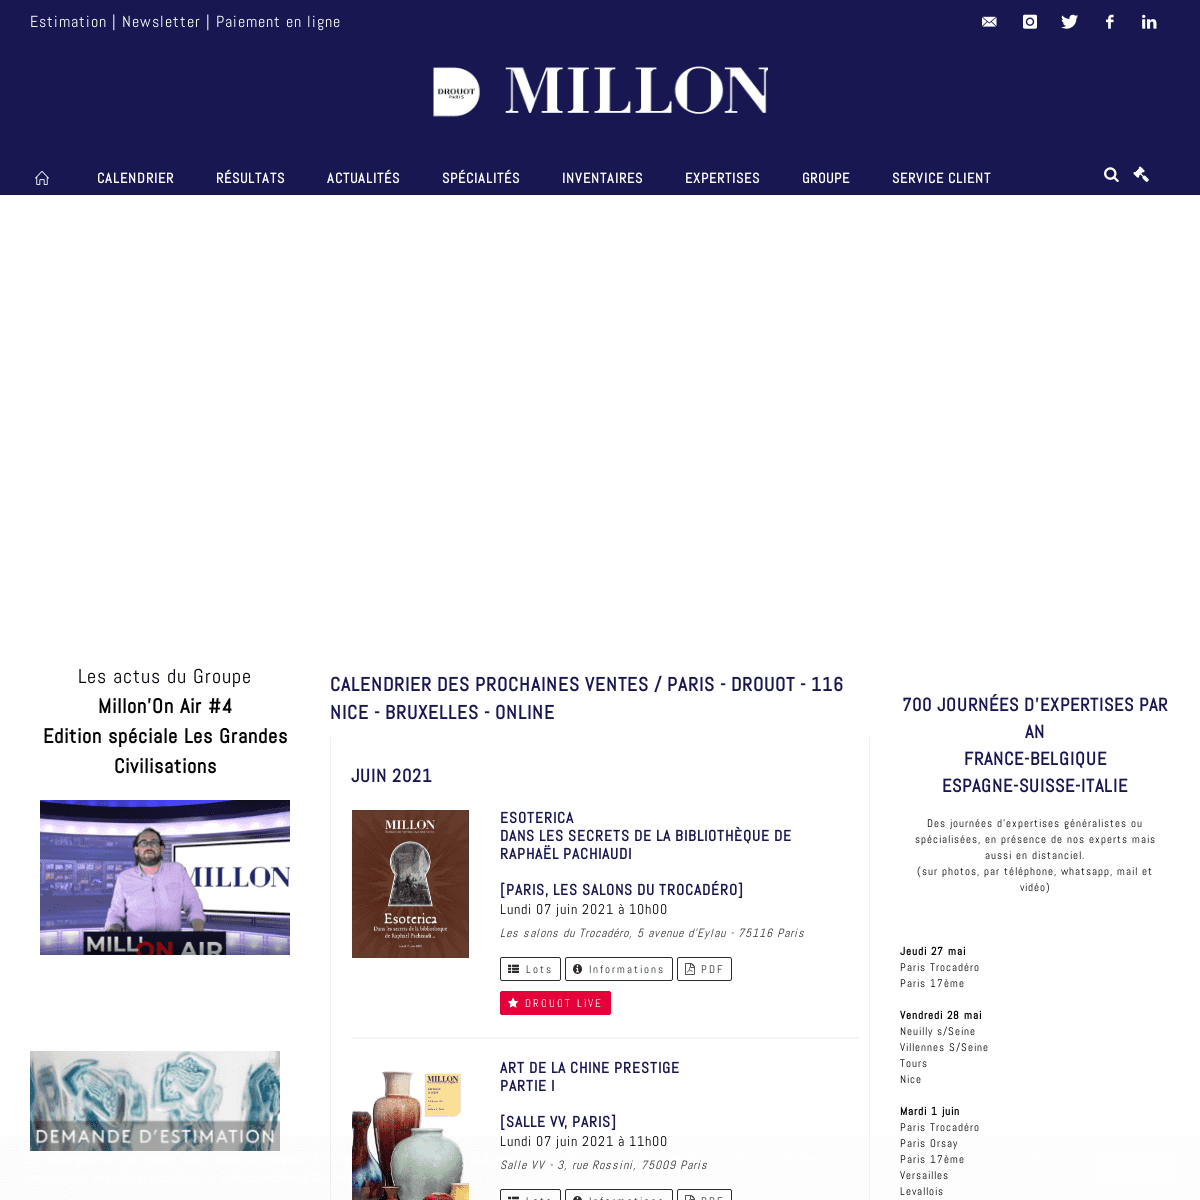 A complete backup of https://millon.com